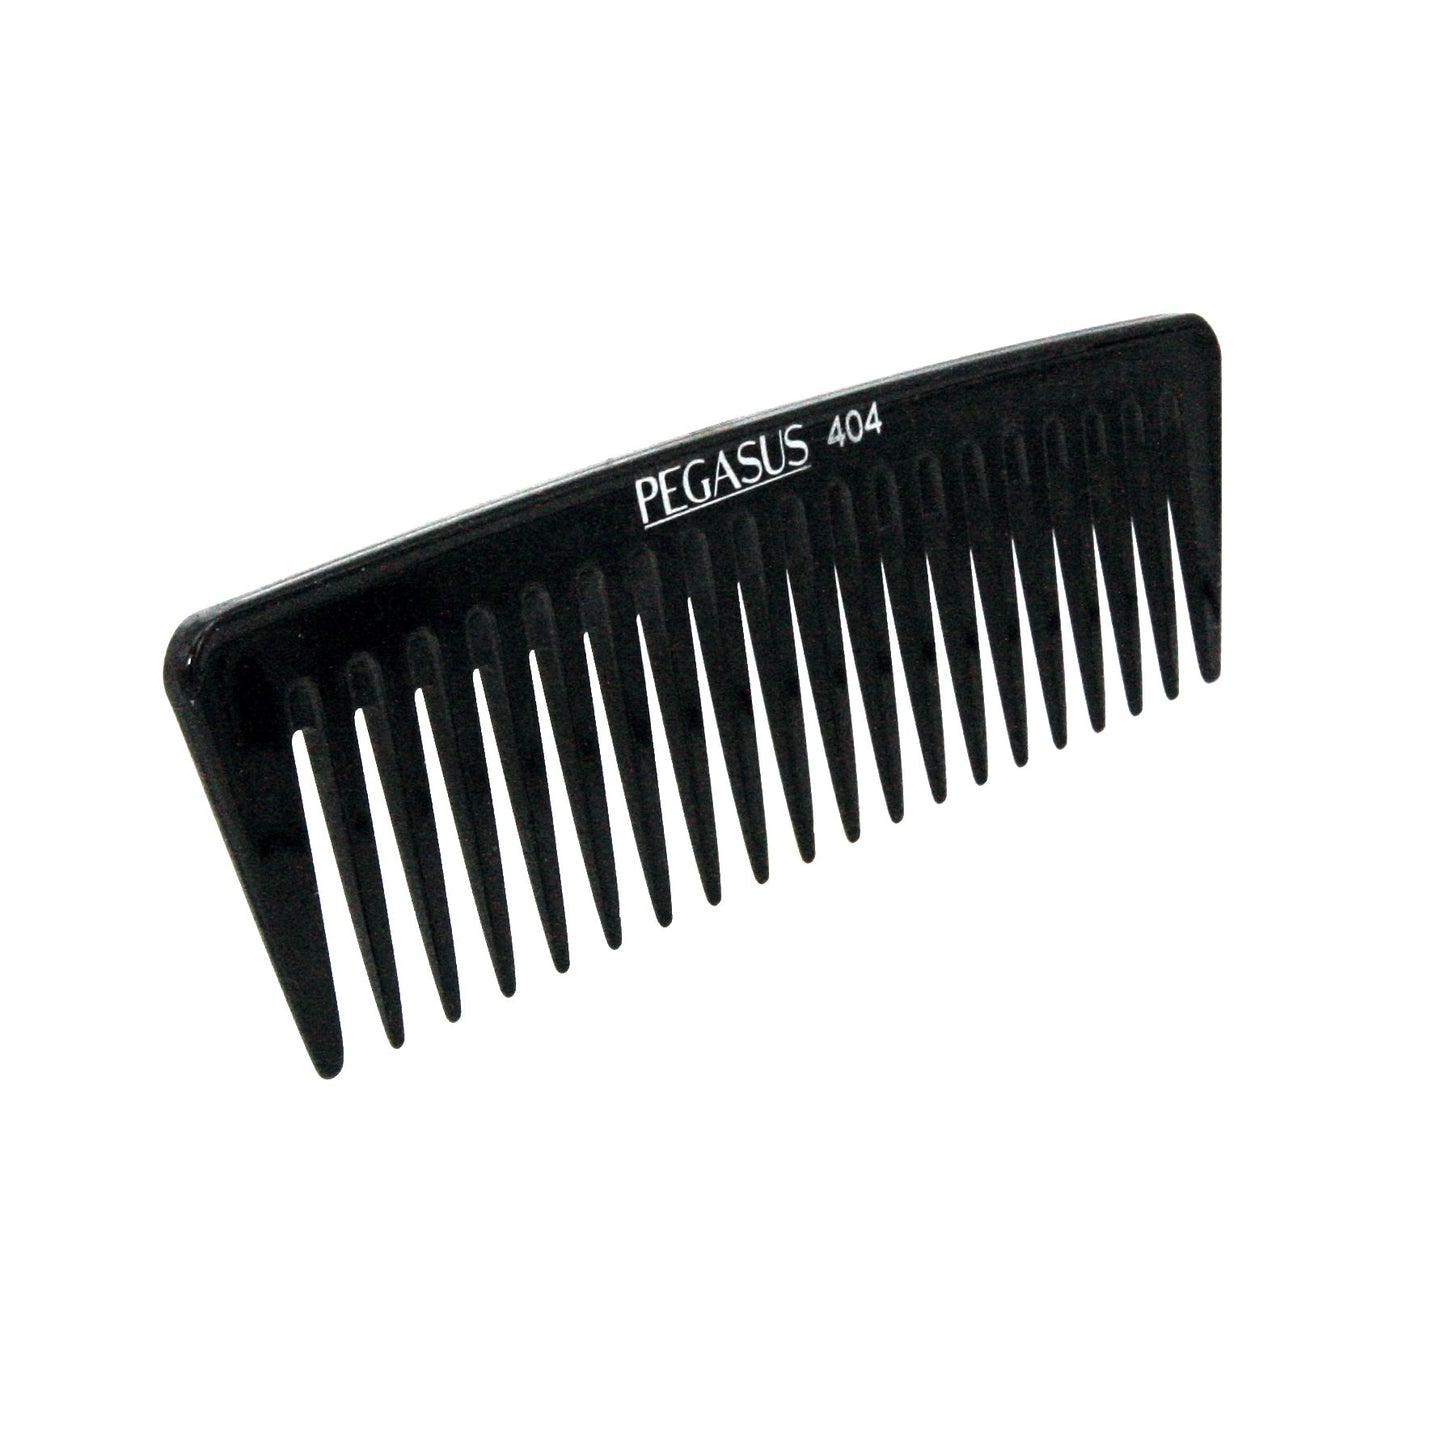 Pegasus 404, 7in Hard Rubber Wide Tooth Tall Styling Comb, Handmade, Seamless, Smooth Edges, Anti Static, Heat and Chemically Resistant, Wet Hair, Everyday Grooming Comb | Peines de goma dura - Black